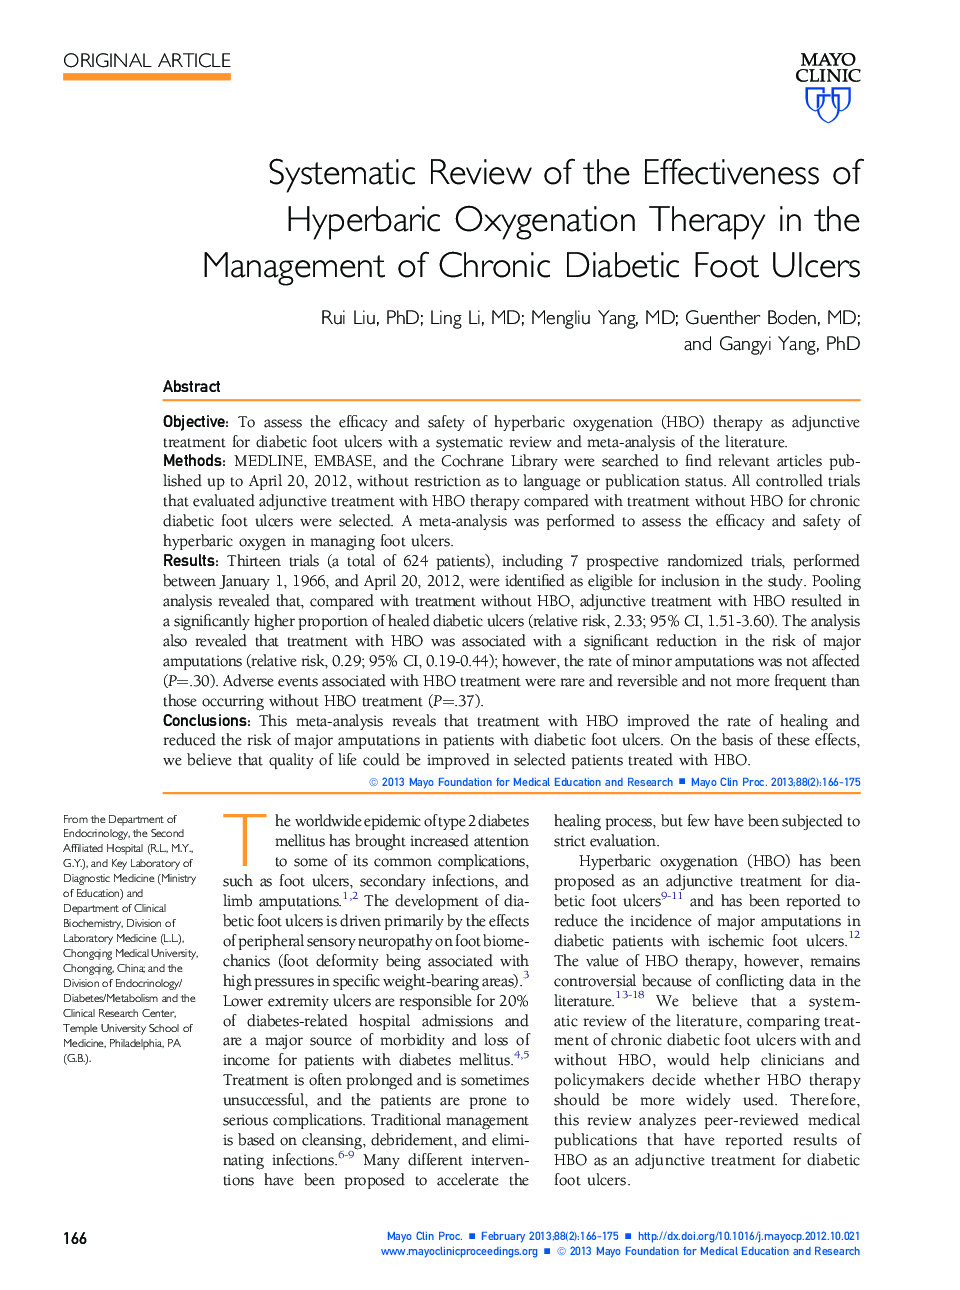 Systematic Review of the Effectiveness of Hyperbaric Oxygenation Therapy in the Management of Chronic Diabetic Foot Ulcers